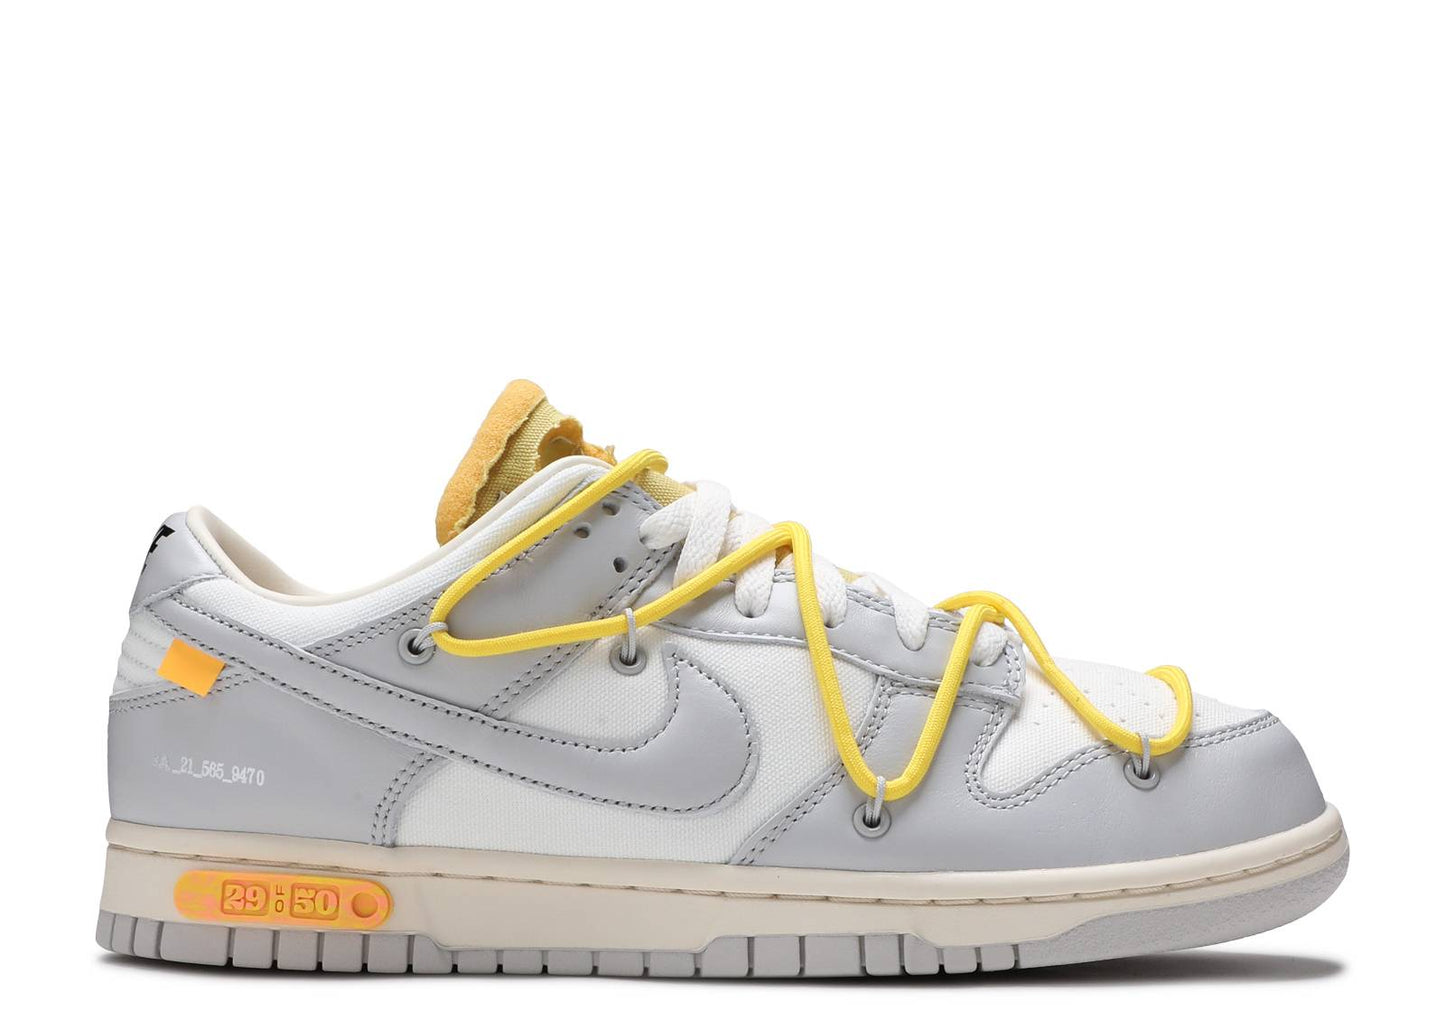 Off-White x Nike Dunk Low "Dear Summer - Lot 29 of 50"